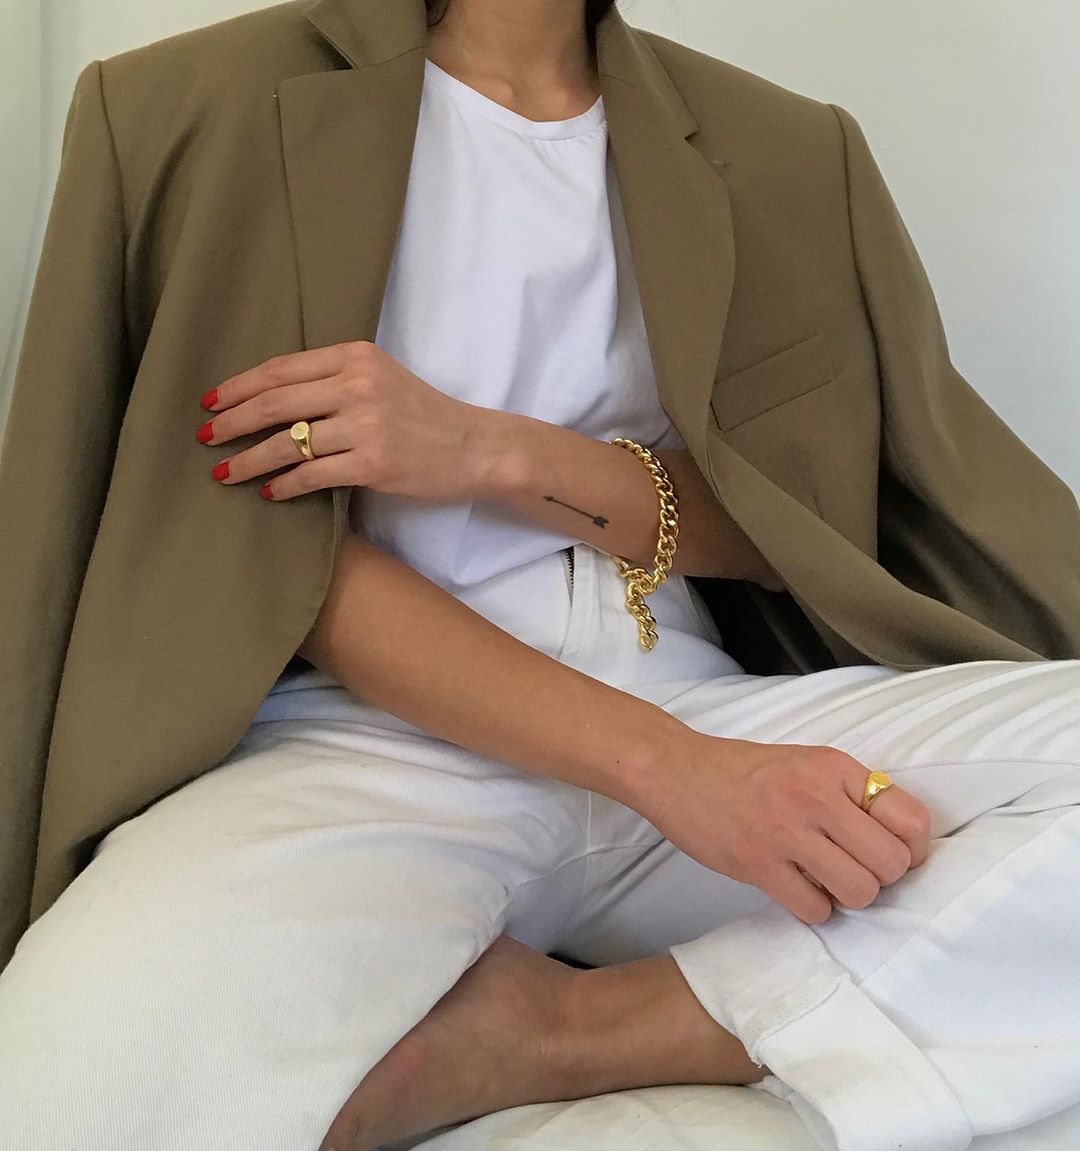 This Instagram Outfit Makes Us Want a Neutral Blazer